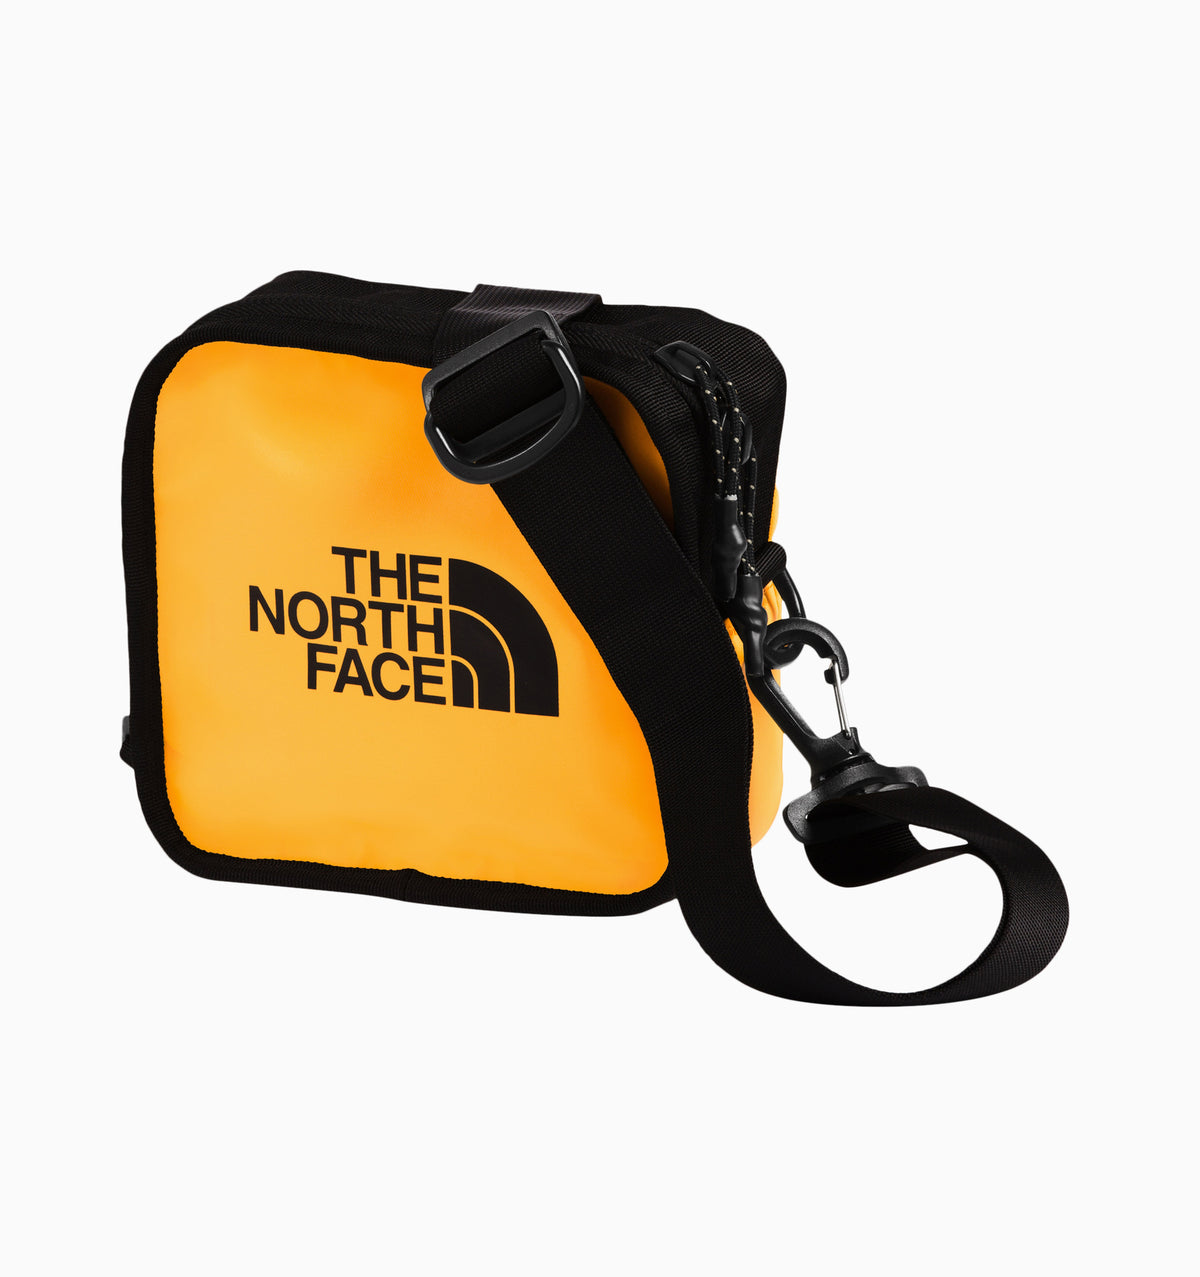 The North Face Explore Bardu 2 - 2022 Edition - Summit Gold